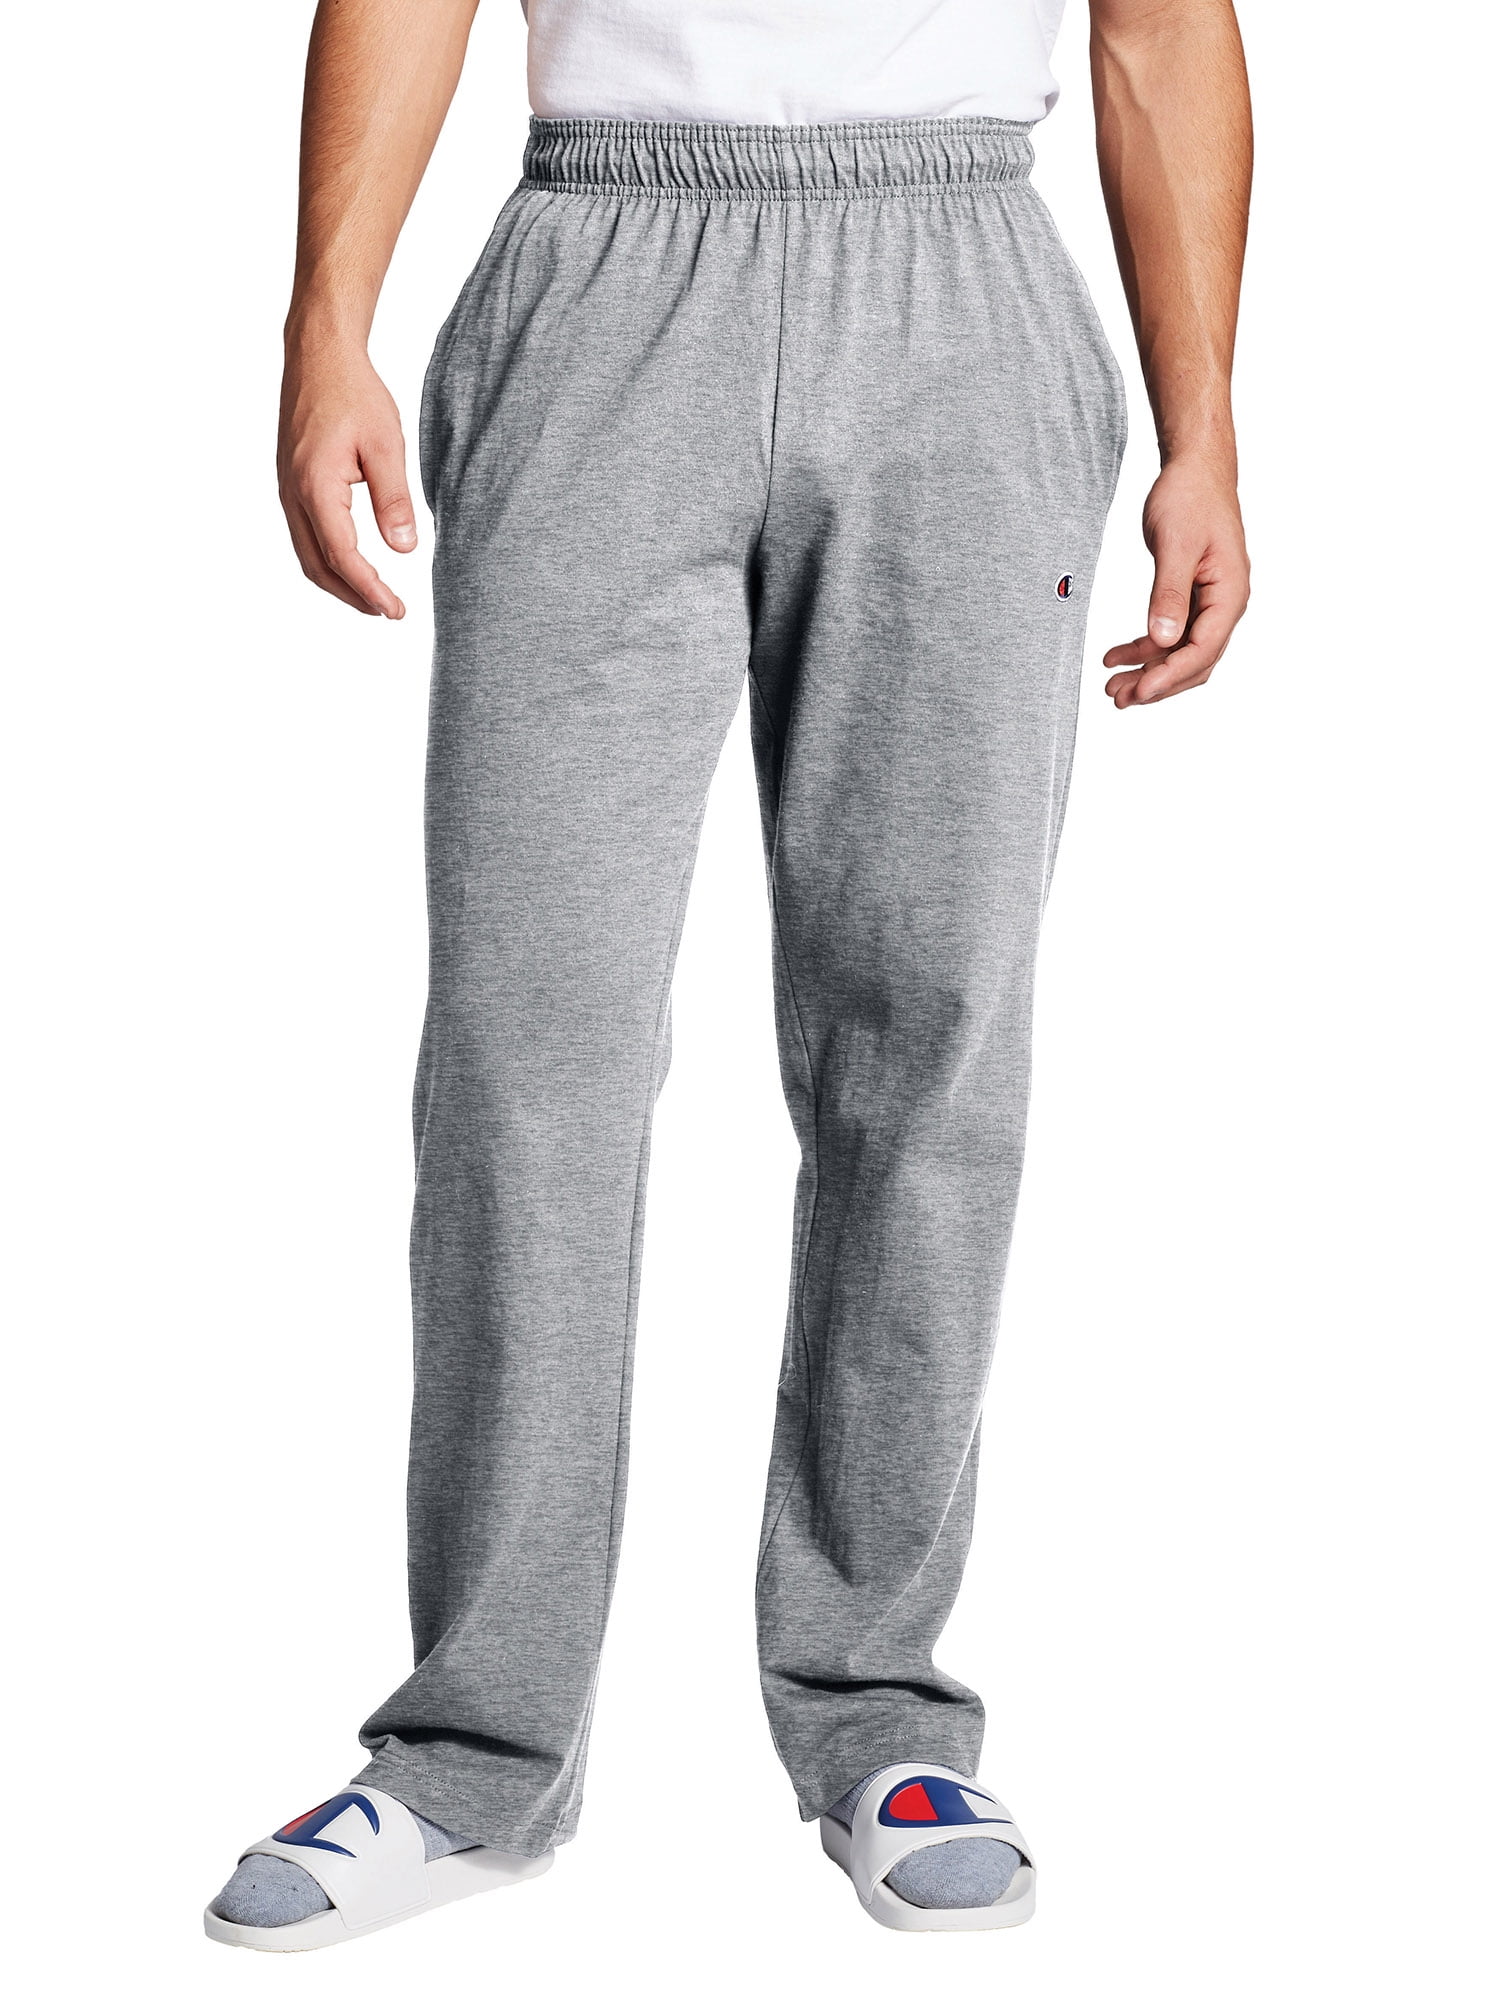 Jersey Sweatpants, up to Size 4XL 